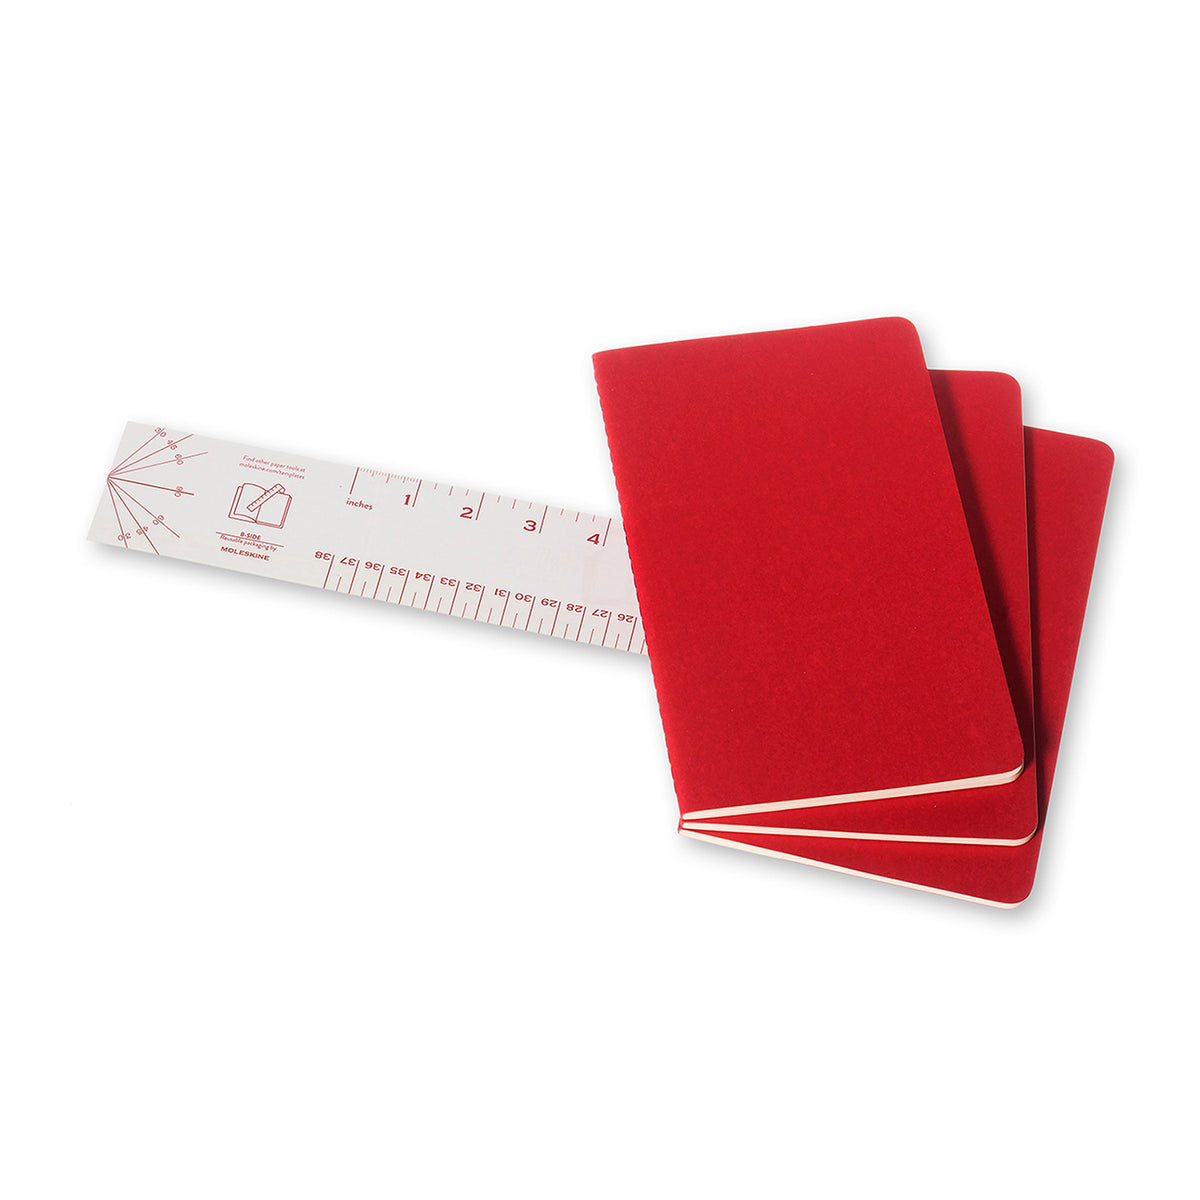 Moleskine - Cahier Notebook - Set of 3 - Ruled - Large - Cranberry Red